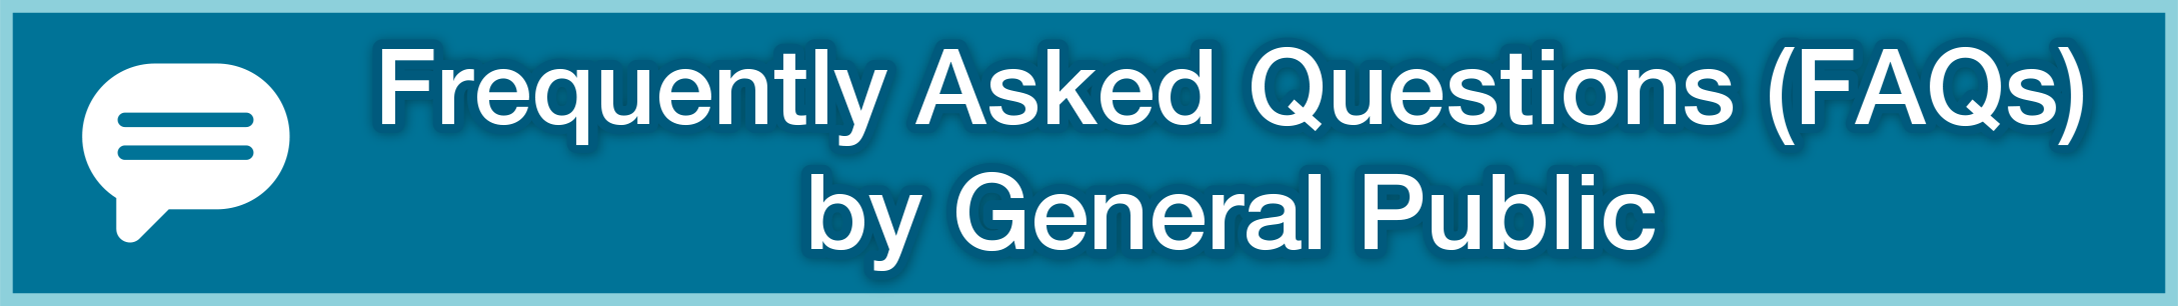 Frequently Asked Questions (FAQs) by General Public